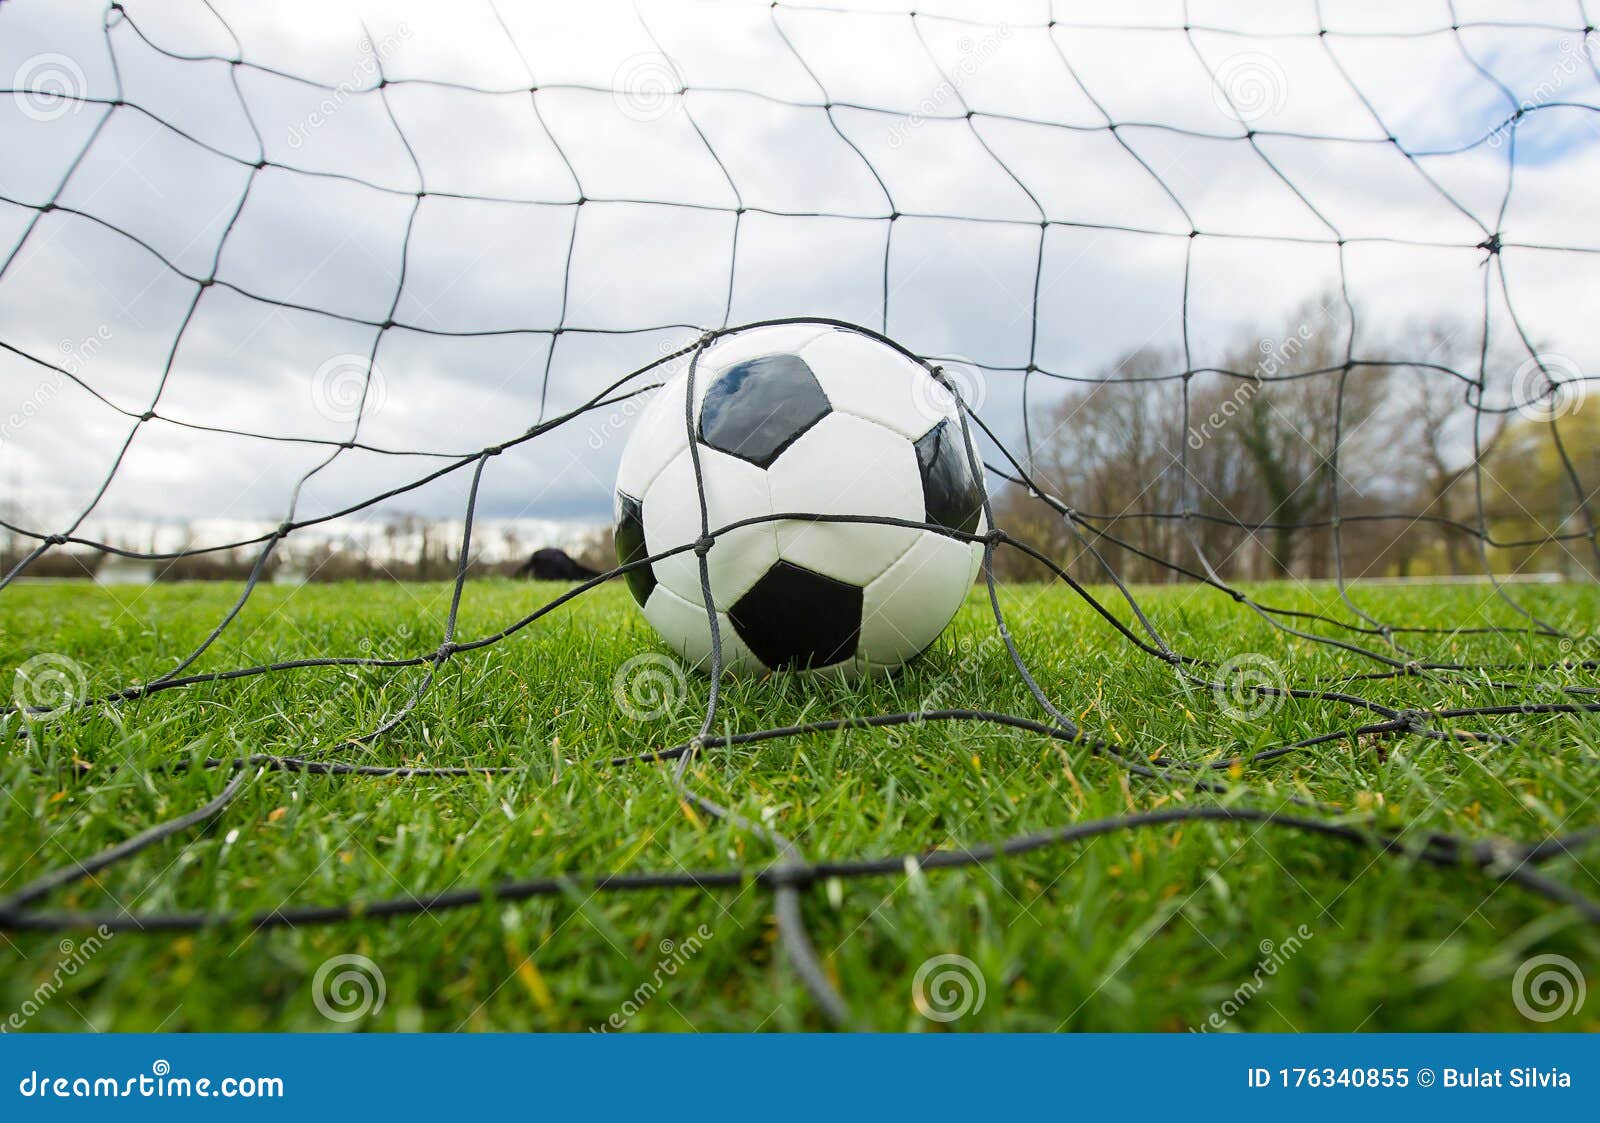 Close Up Of A Soccer Ball Behind The Gates Net Goal Scoring Concept Outdoors Football Match Practicing Spring Sports Healthy Stock Image Image Of Kick Grass